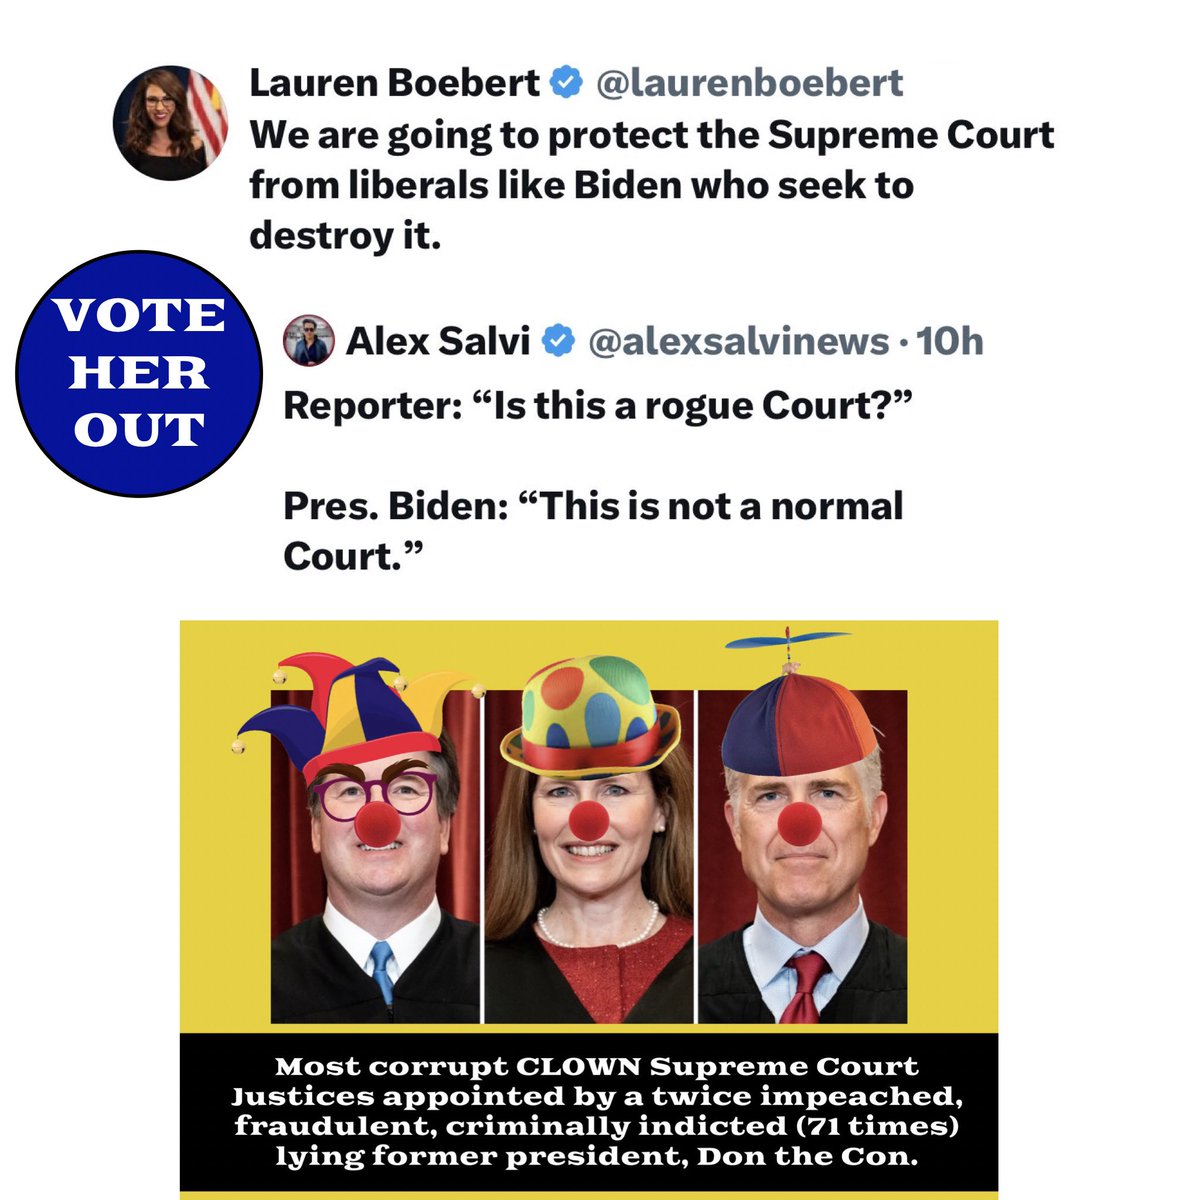 “Lorena Bobbitt Boebert” illegitimate grandmother to be (like mother, like son unwed high school parent) why not sit this one out? https://t.co/49PnTJZEKo